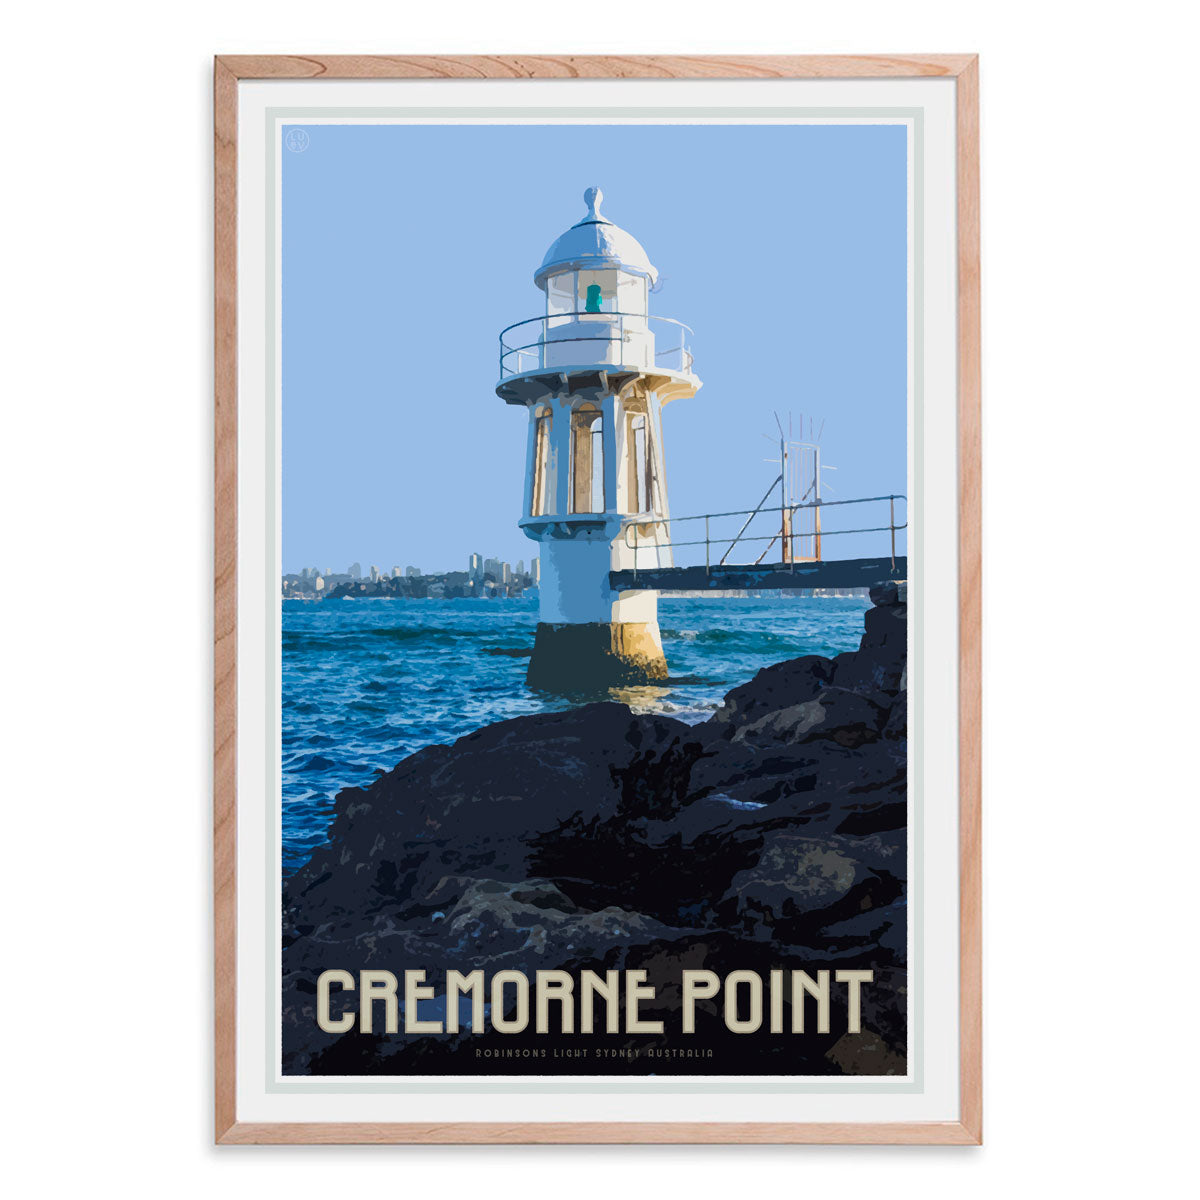 Cremorne point vintage style oak framed travel print by Places We Luv